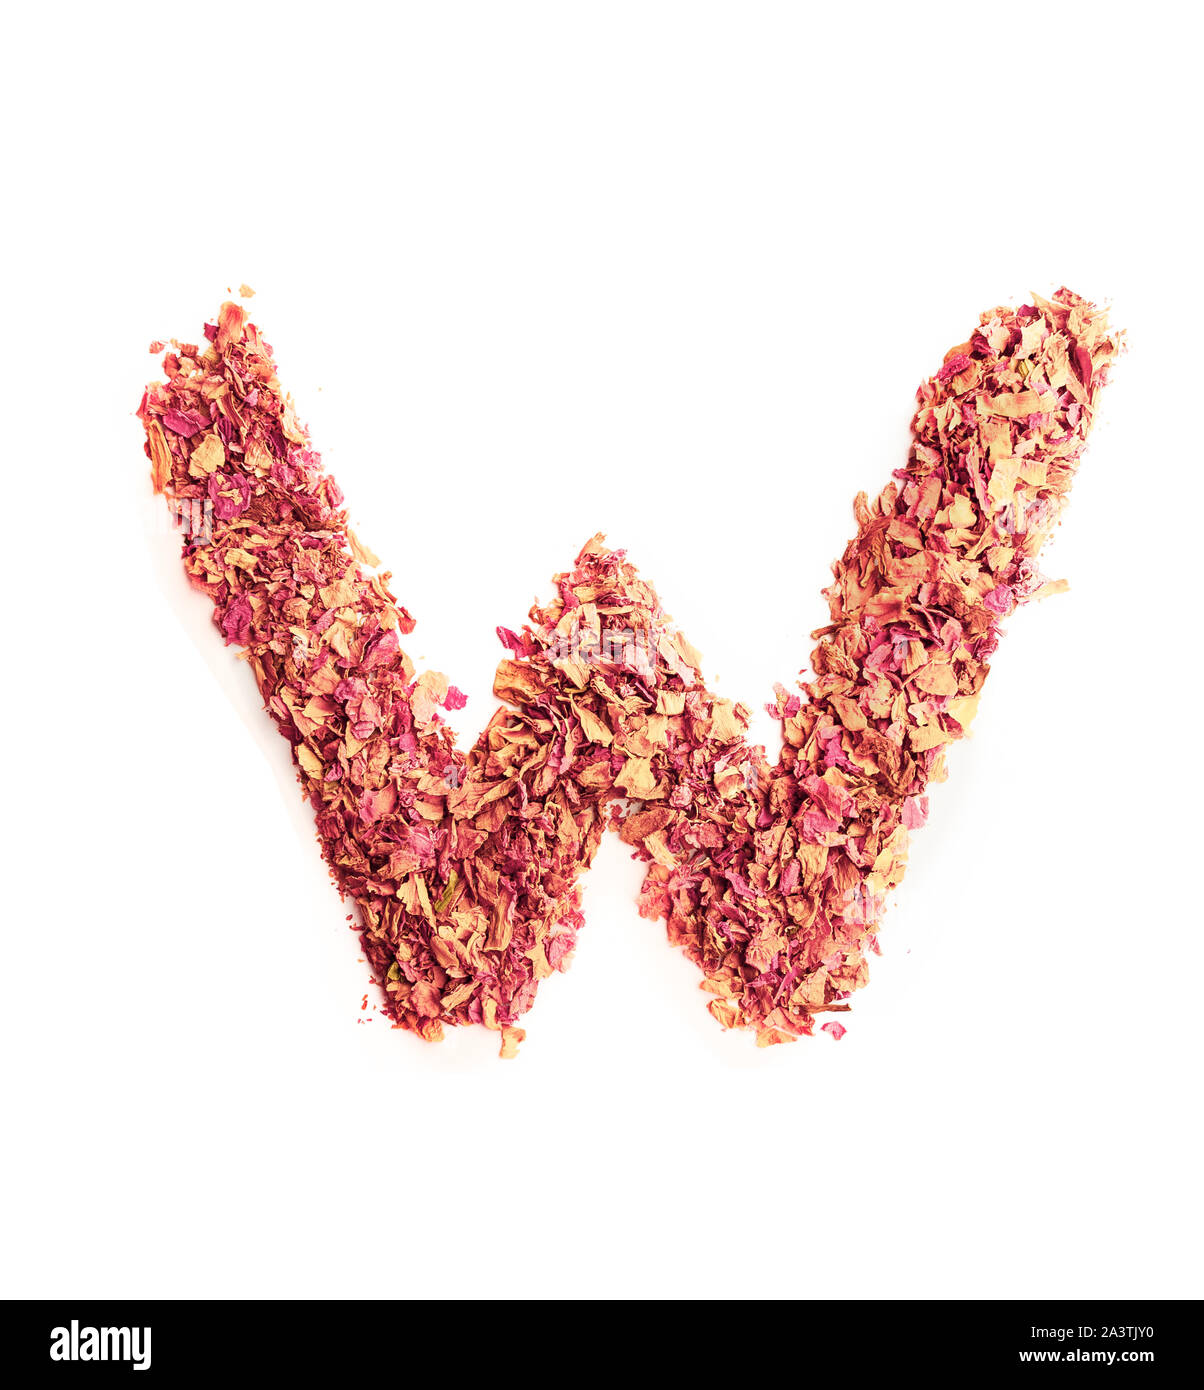 Letter W made of rose petals, isolated on white background. Food typography, english alphabet. Design element. Stock Photo